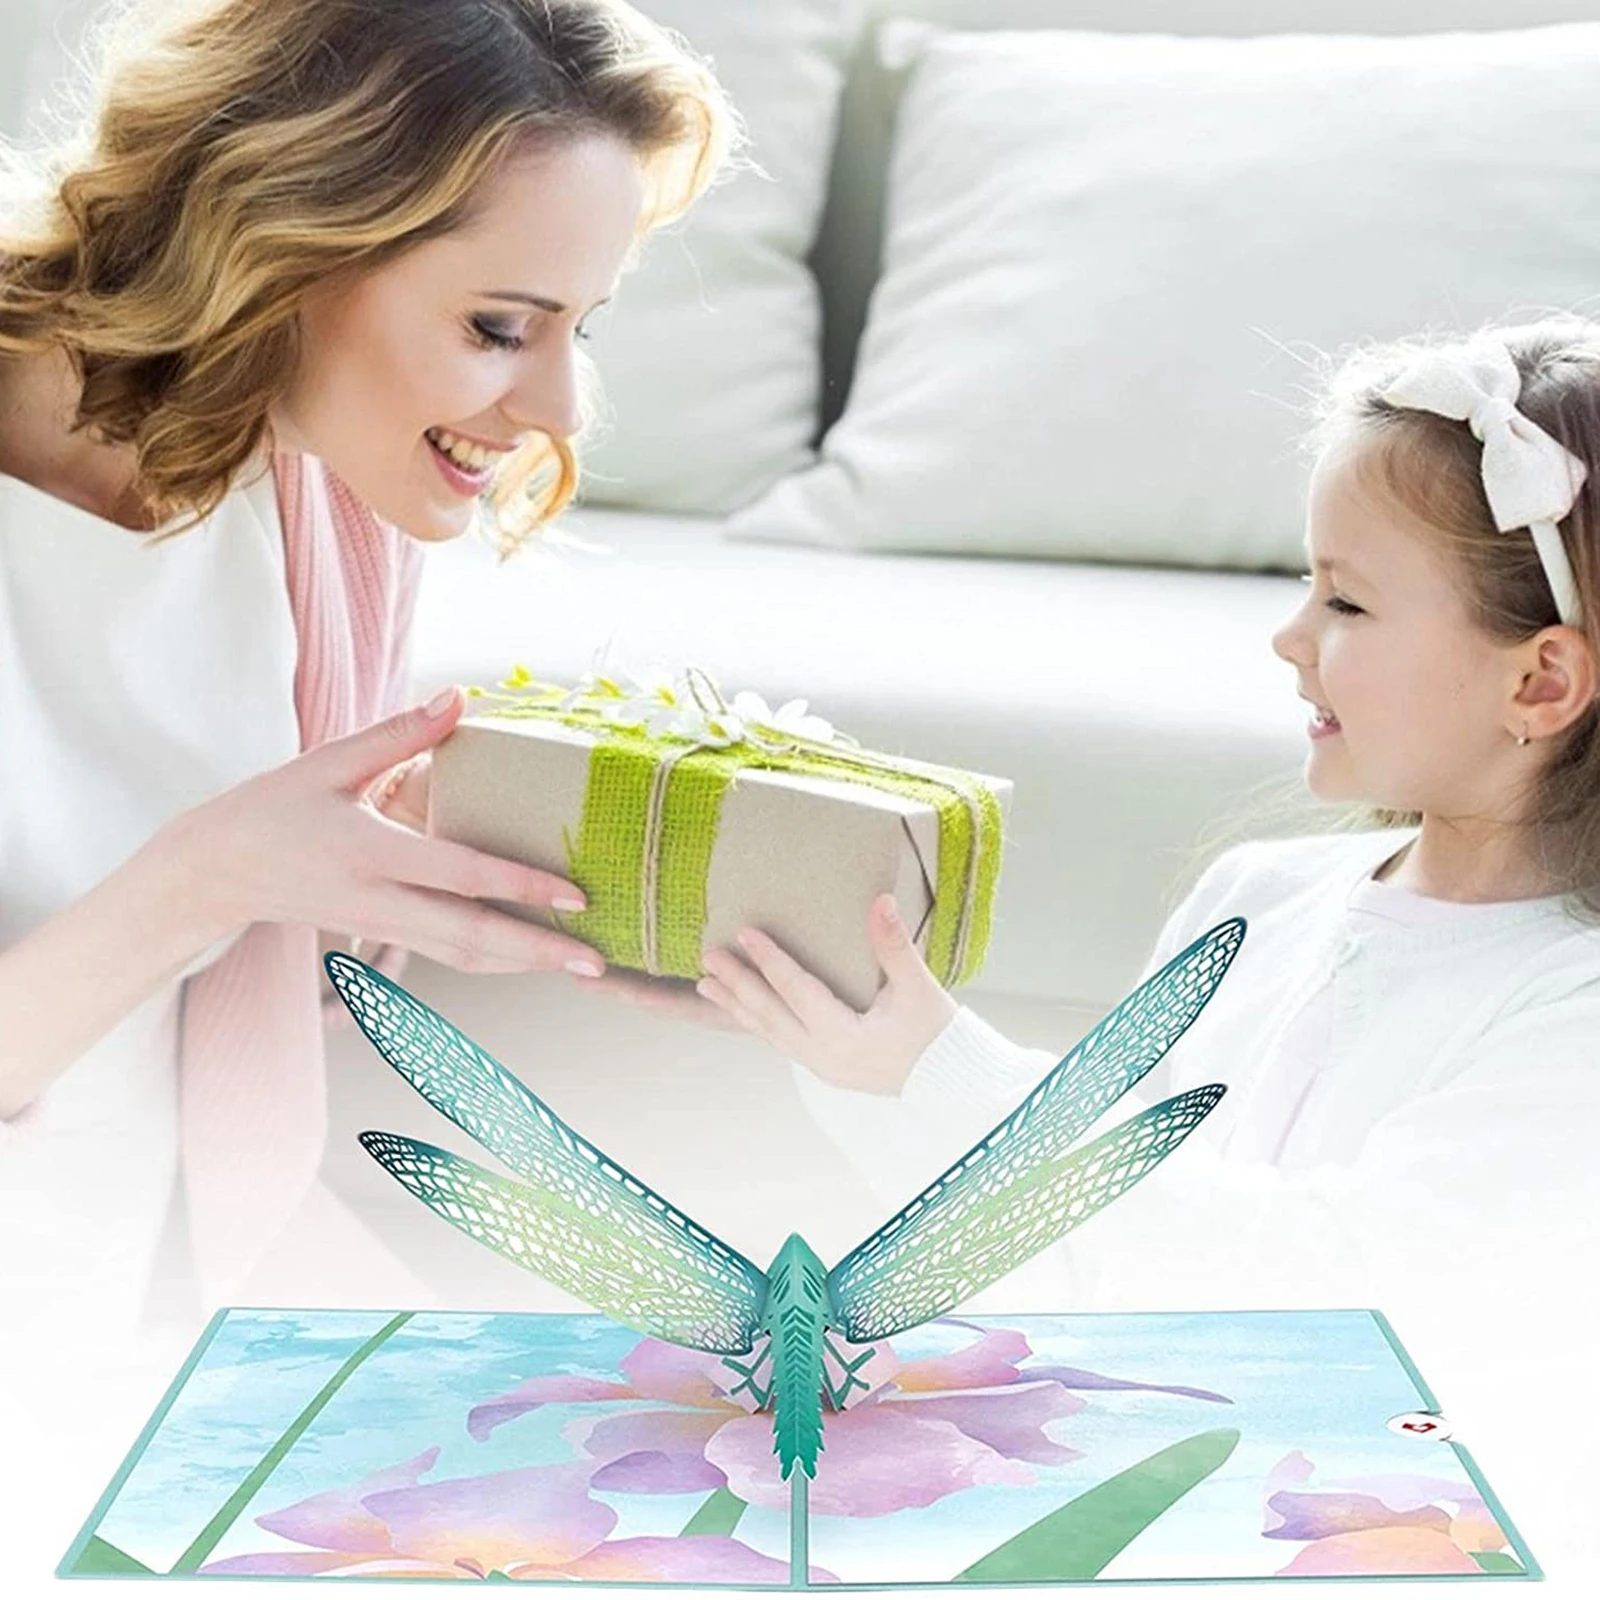 Paper Dragonfly  Up Greeting Card Mother's Day Birthday Gifts for Wife Wedding